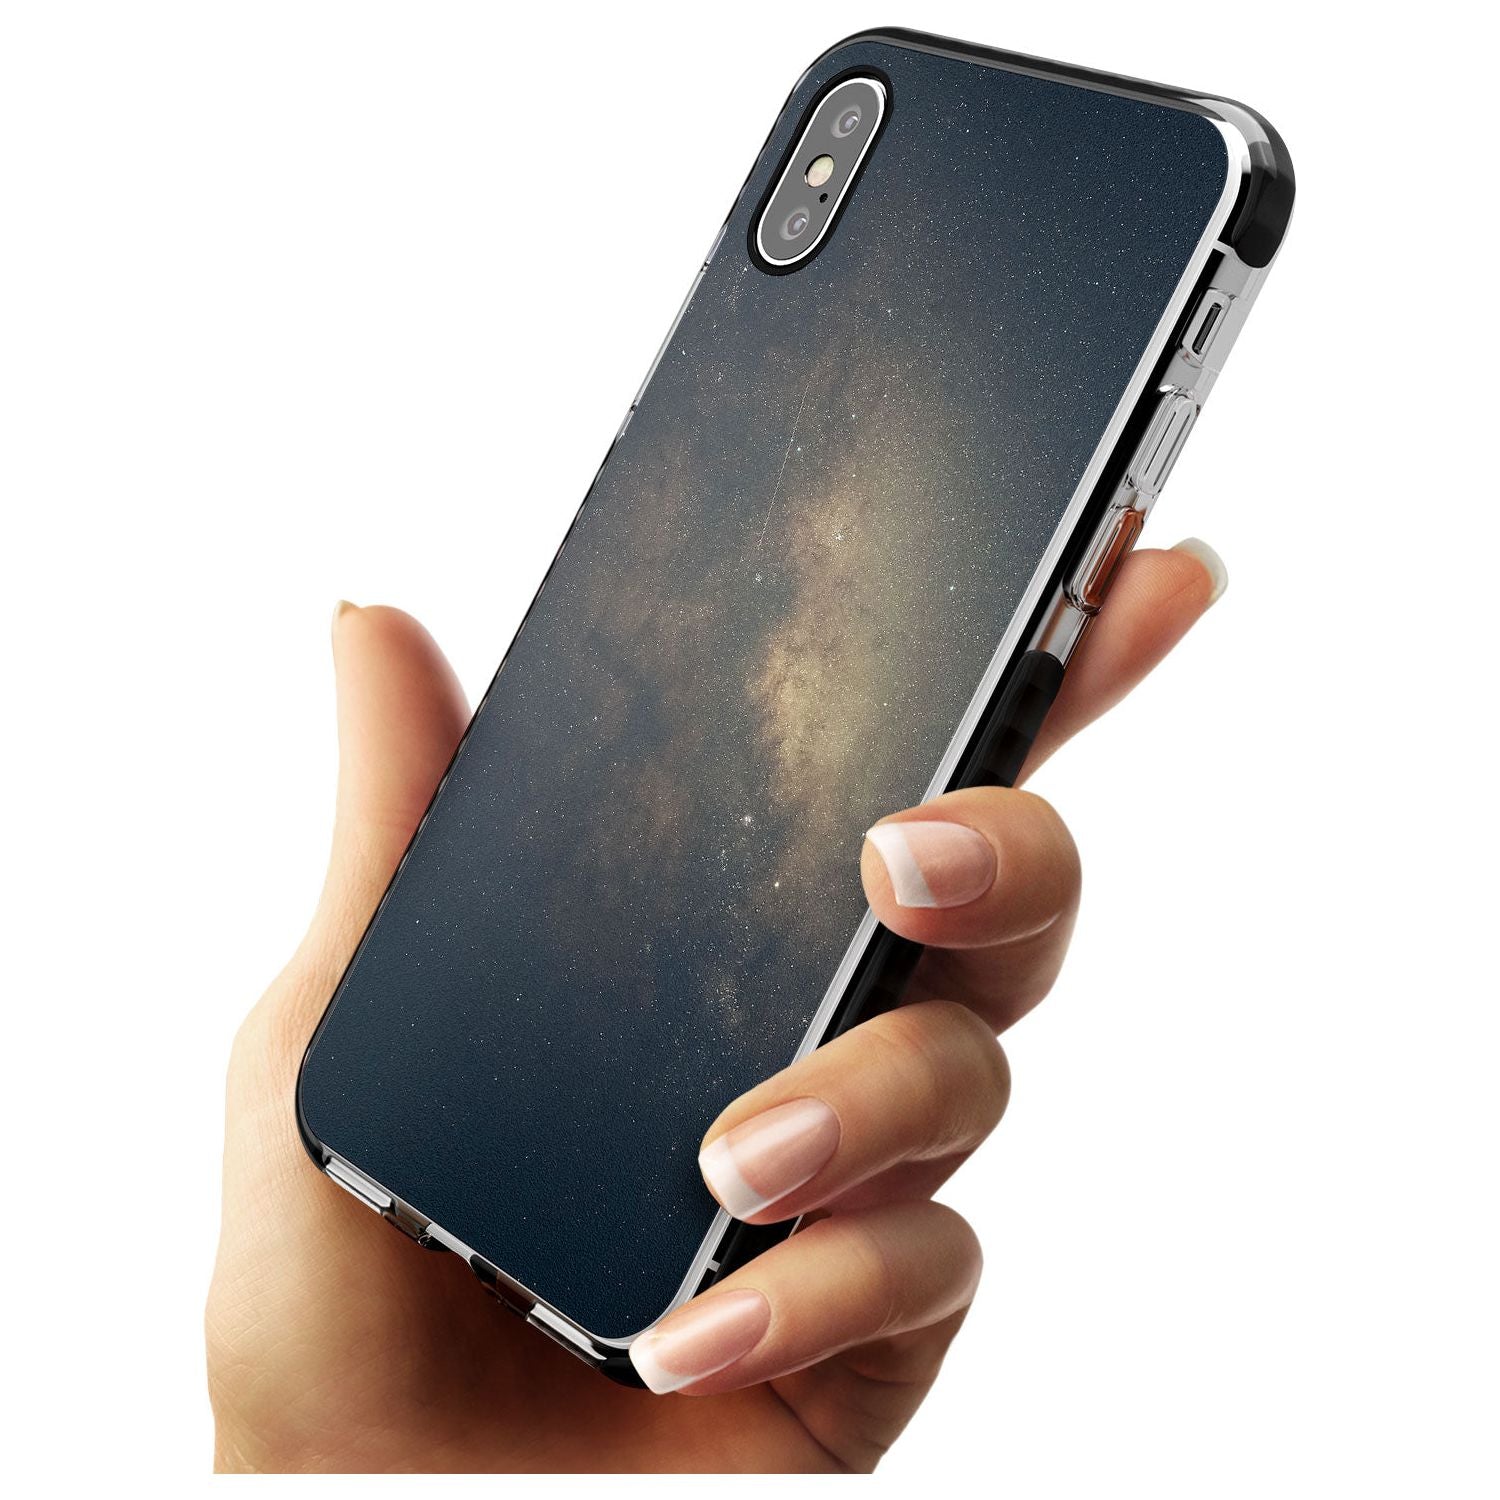 Night Sky Photograph Black Impact Phone Case for iPhone X XS Max XR